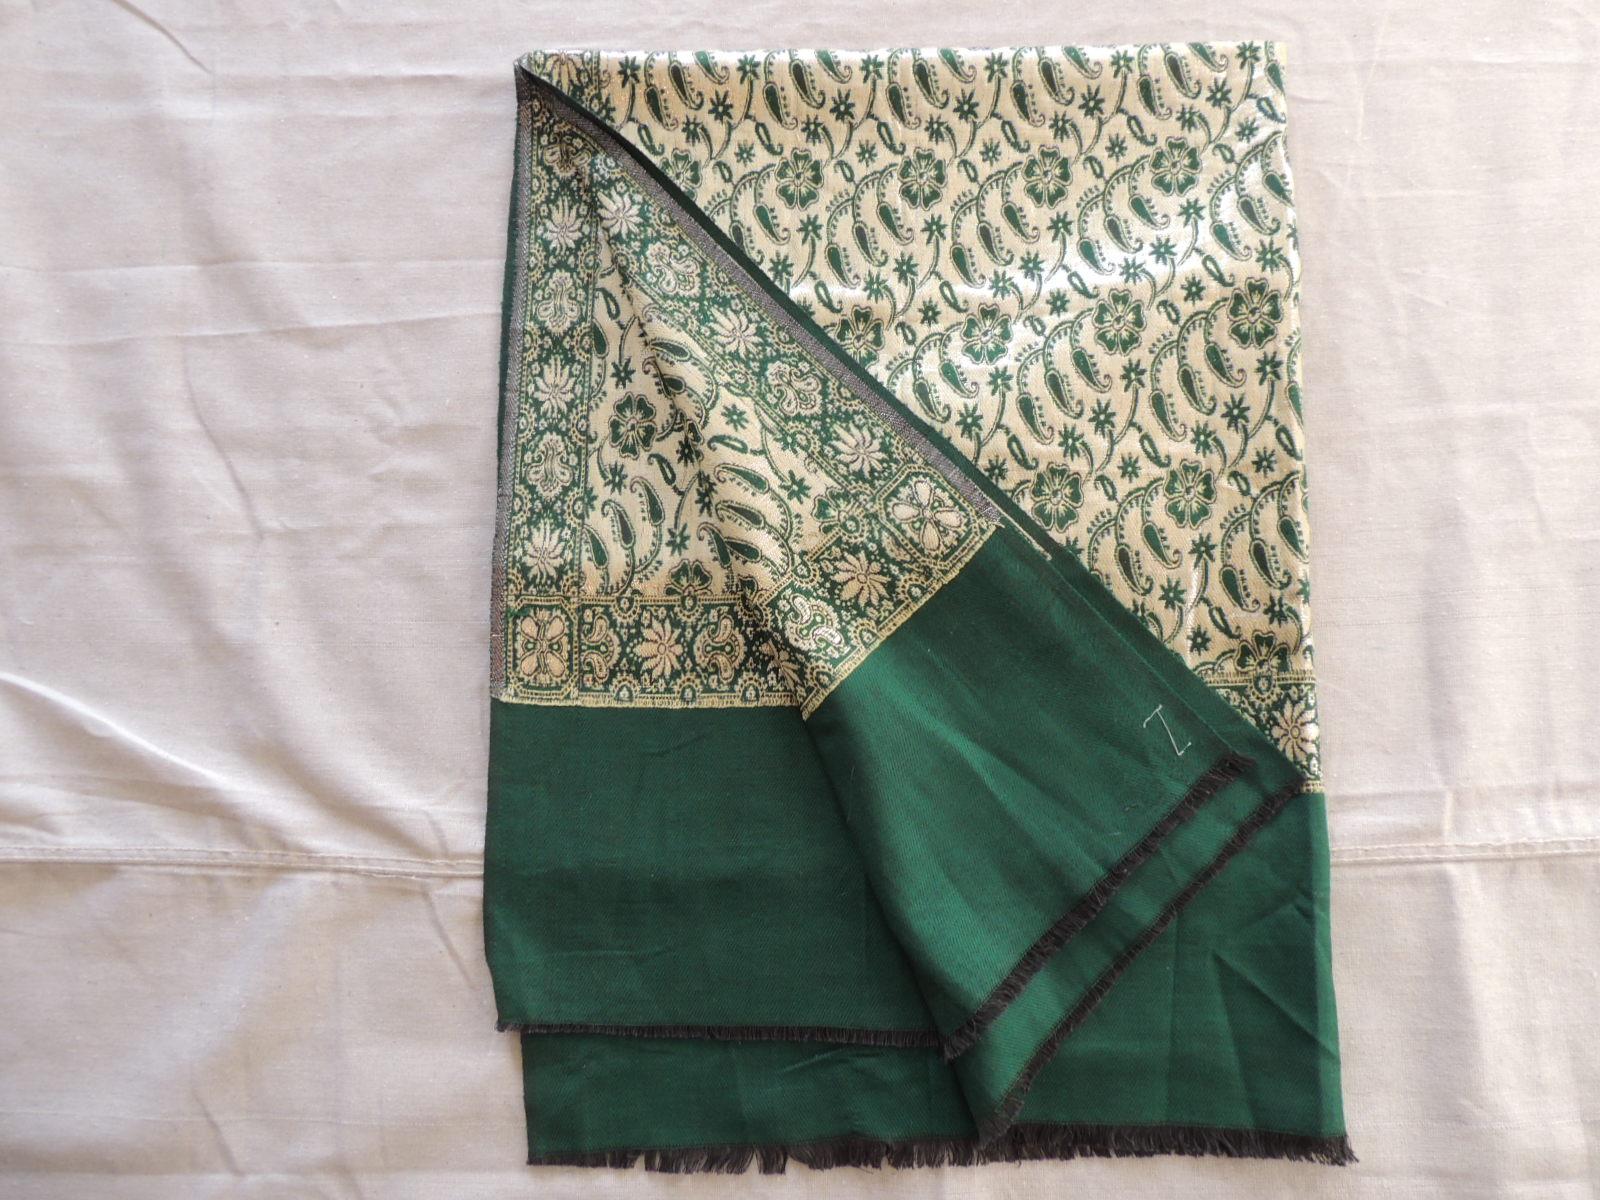 Vintage emerald green and gold Indian woven paisley shawl.
Or table runner.
Size: 77